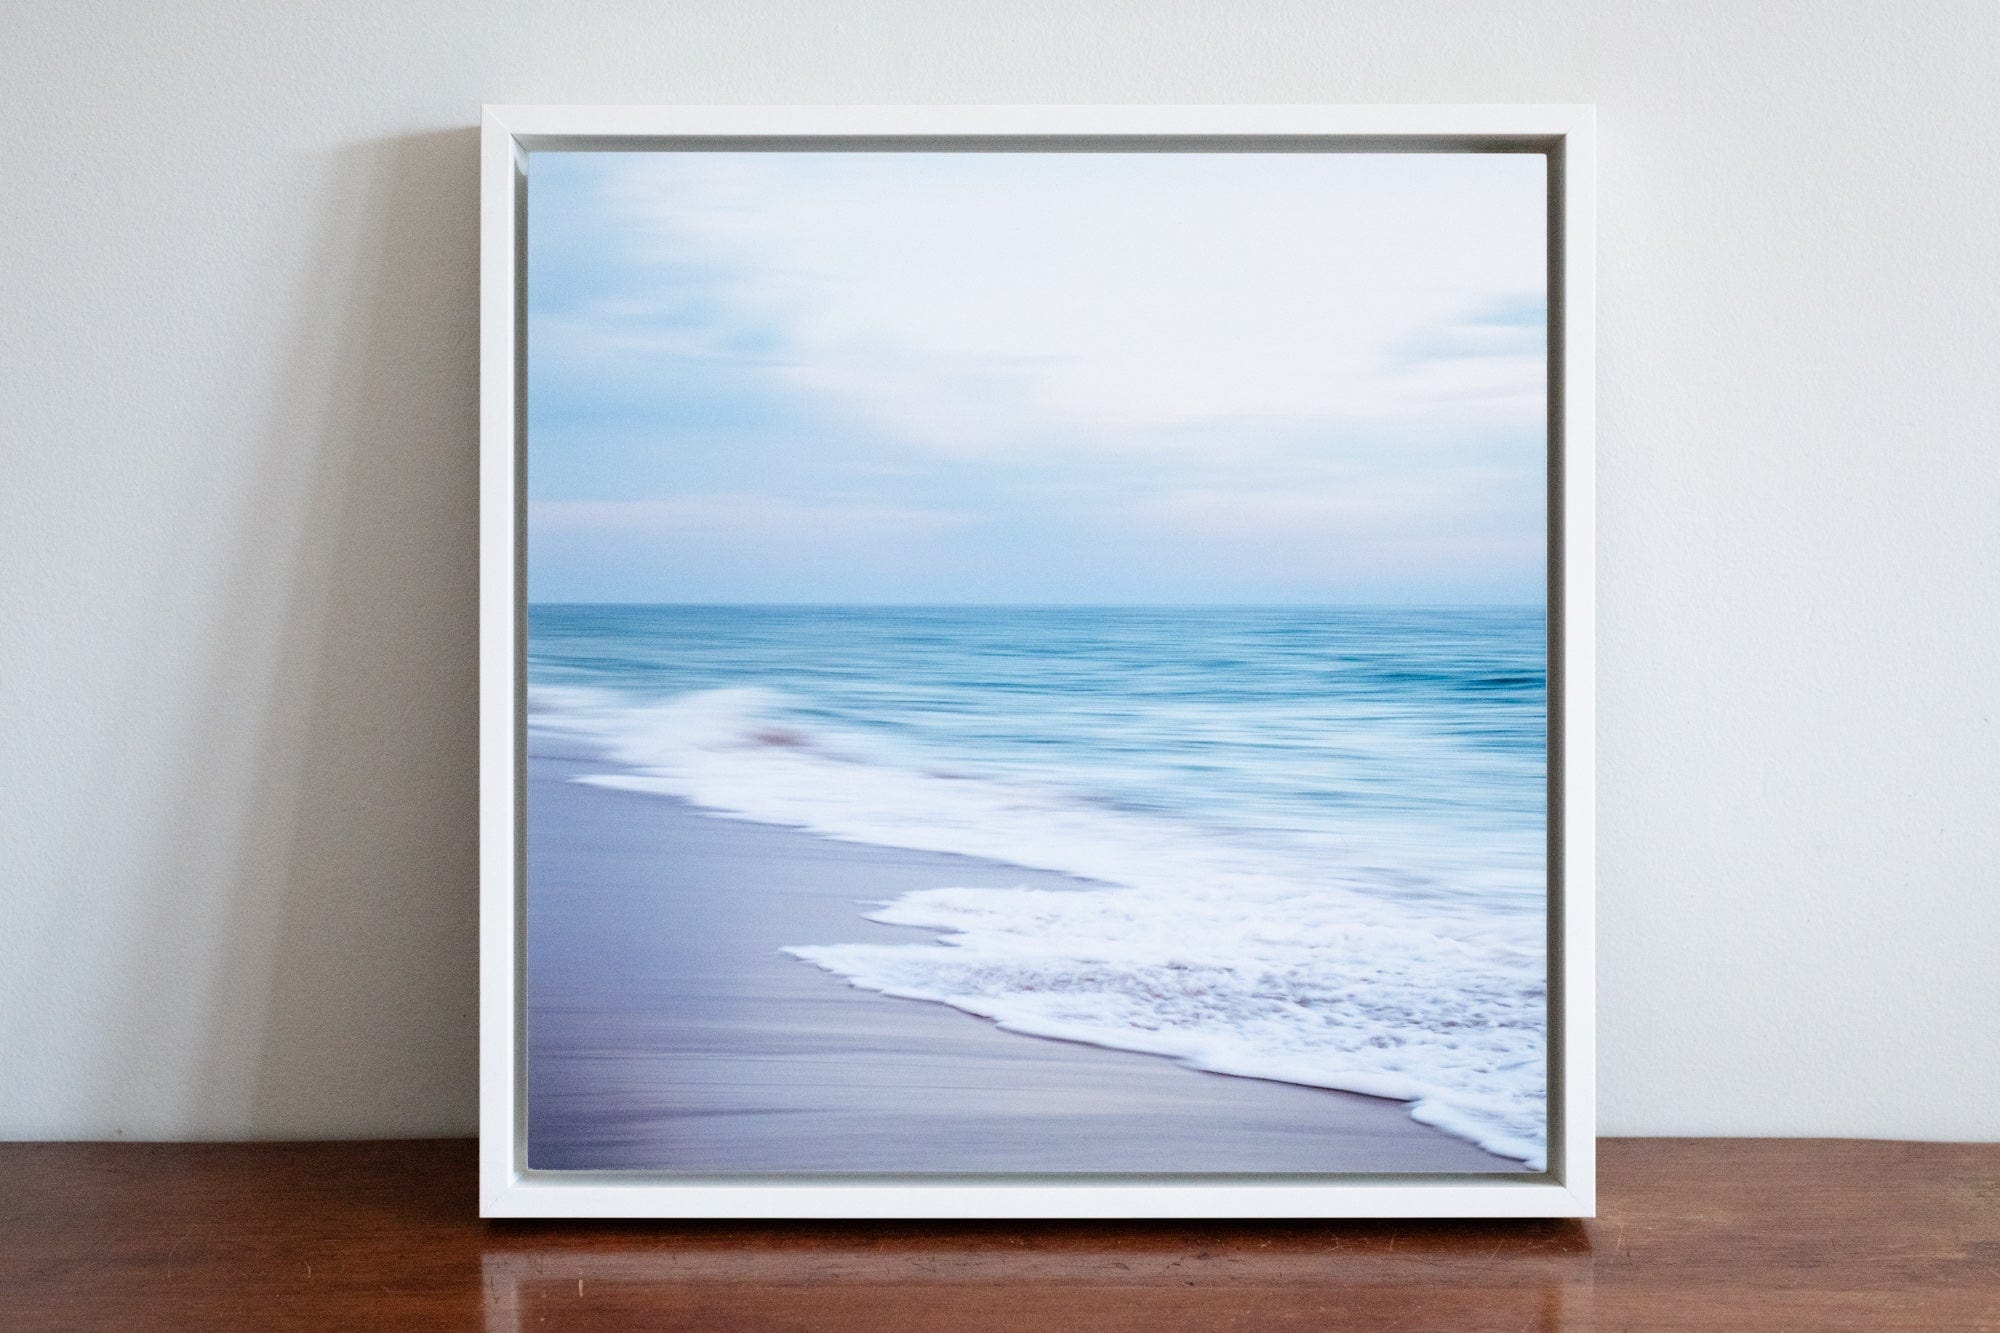 Cate Brown Photo East Beach Abstract #10 // Framed Metal Print 18x18" // Limited Edition of 25 Available Inventory Ocean Fine Art